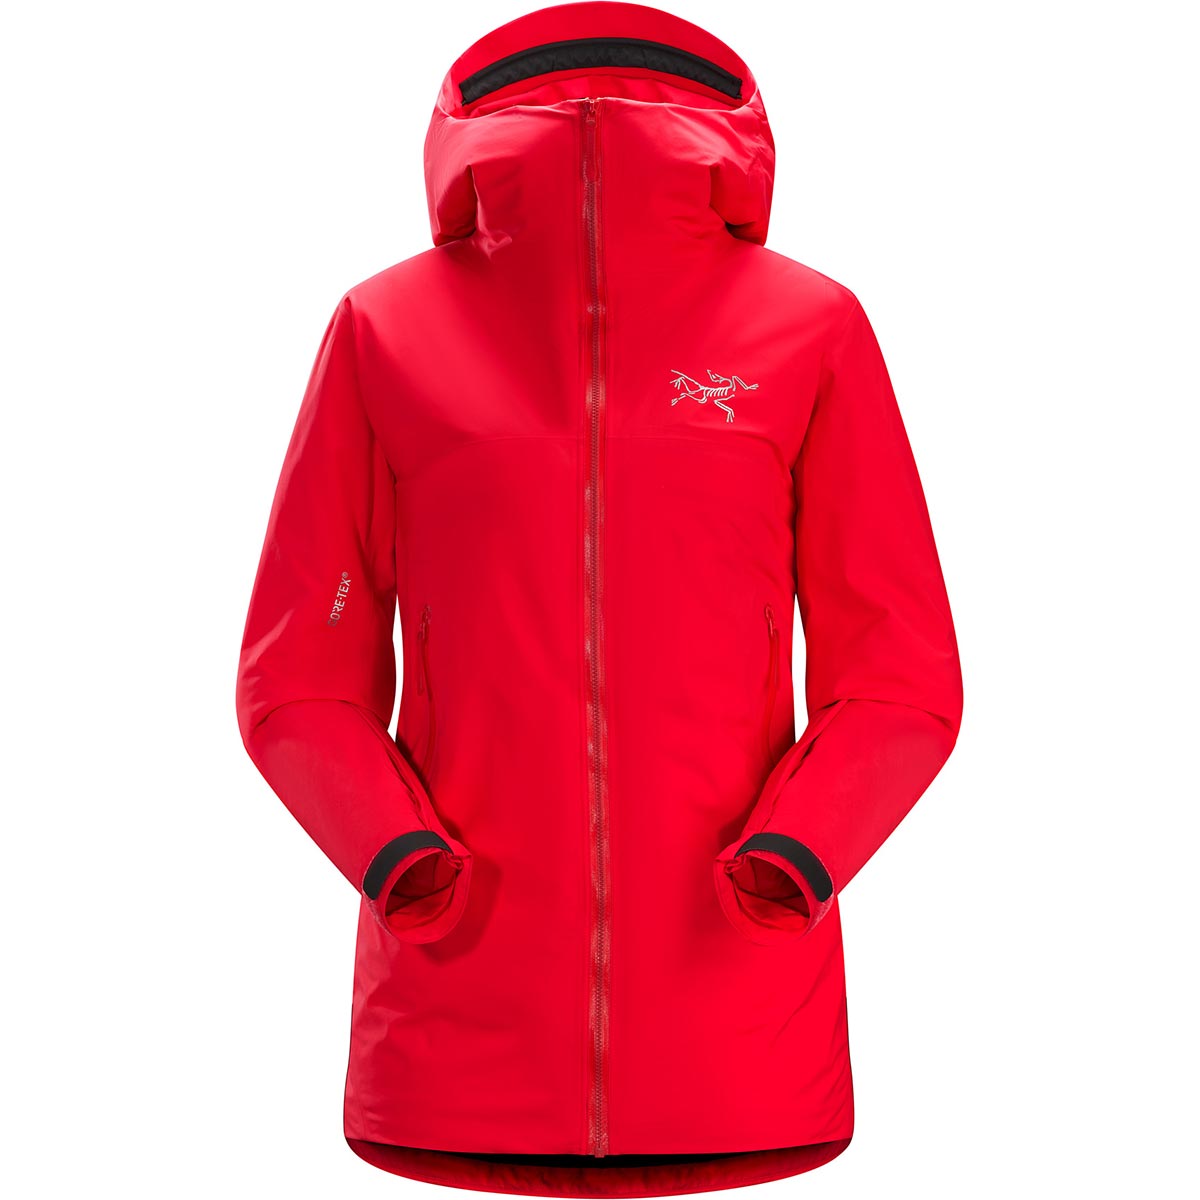 Arc'teryx Airah Jacket, women's, discontinued Fall 2017 colors (free ...